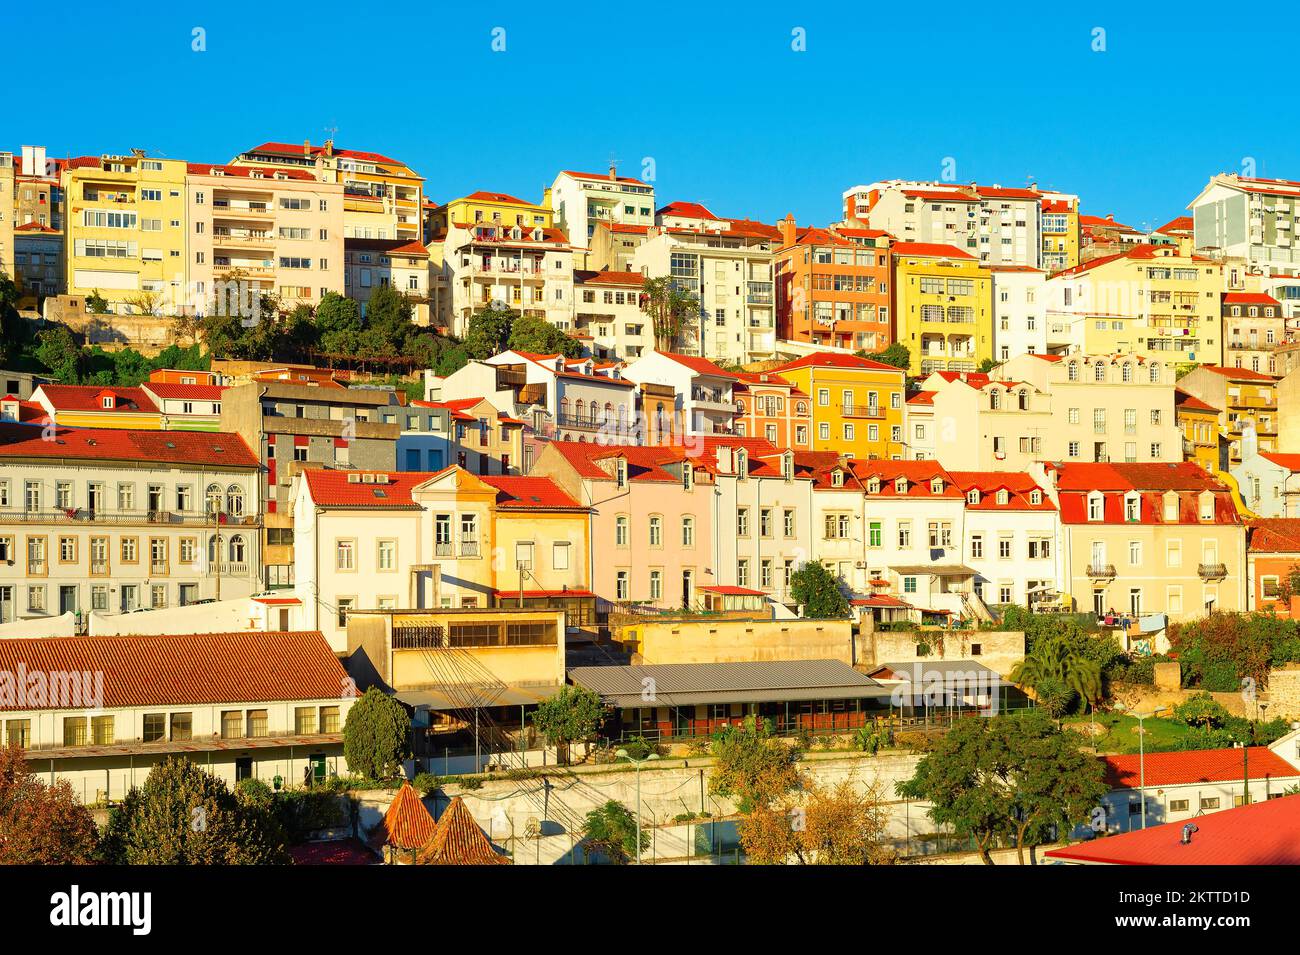 Cascading architecture of residential area, typical house buildings, red rooftops in sunset light, Porto, Portugal Stock Photo